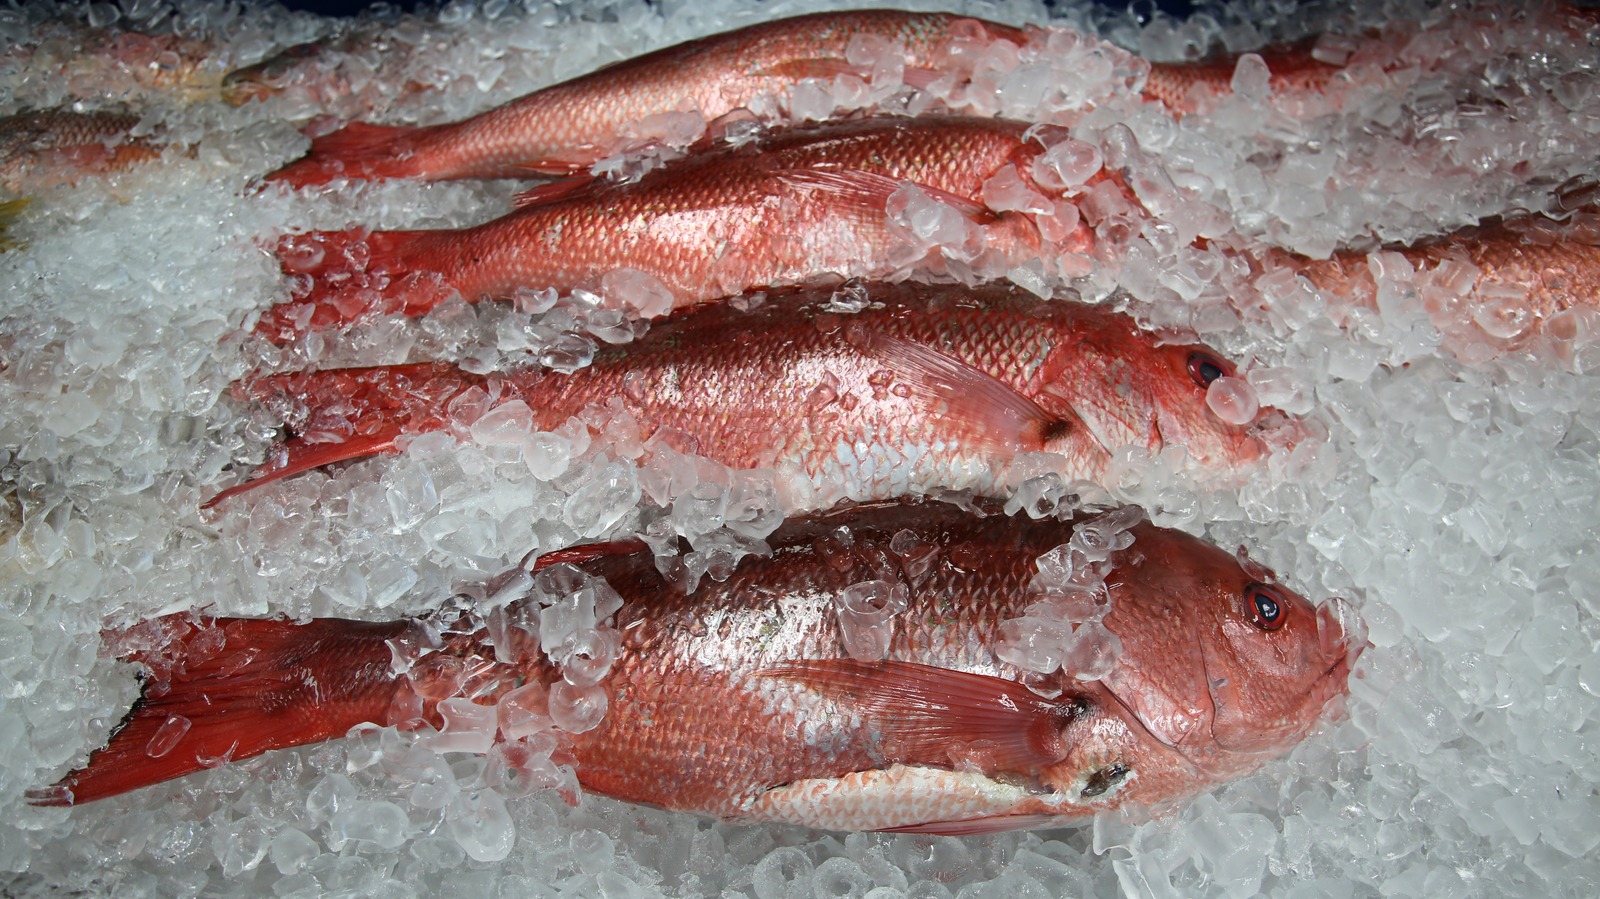 https://www.tastingtable.com/img/gallery/the-ins-and-outs-of-buying-the-best-red-snapper-fish/l-intro-1680105485.jpg